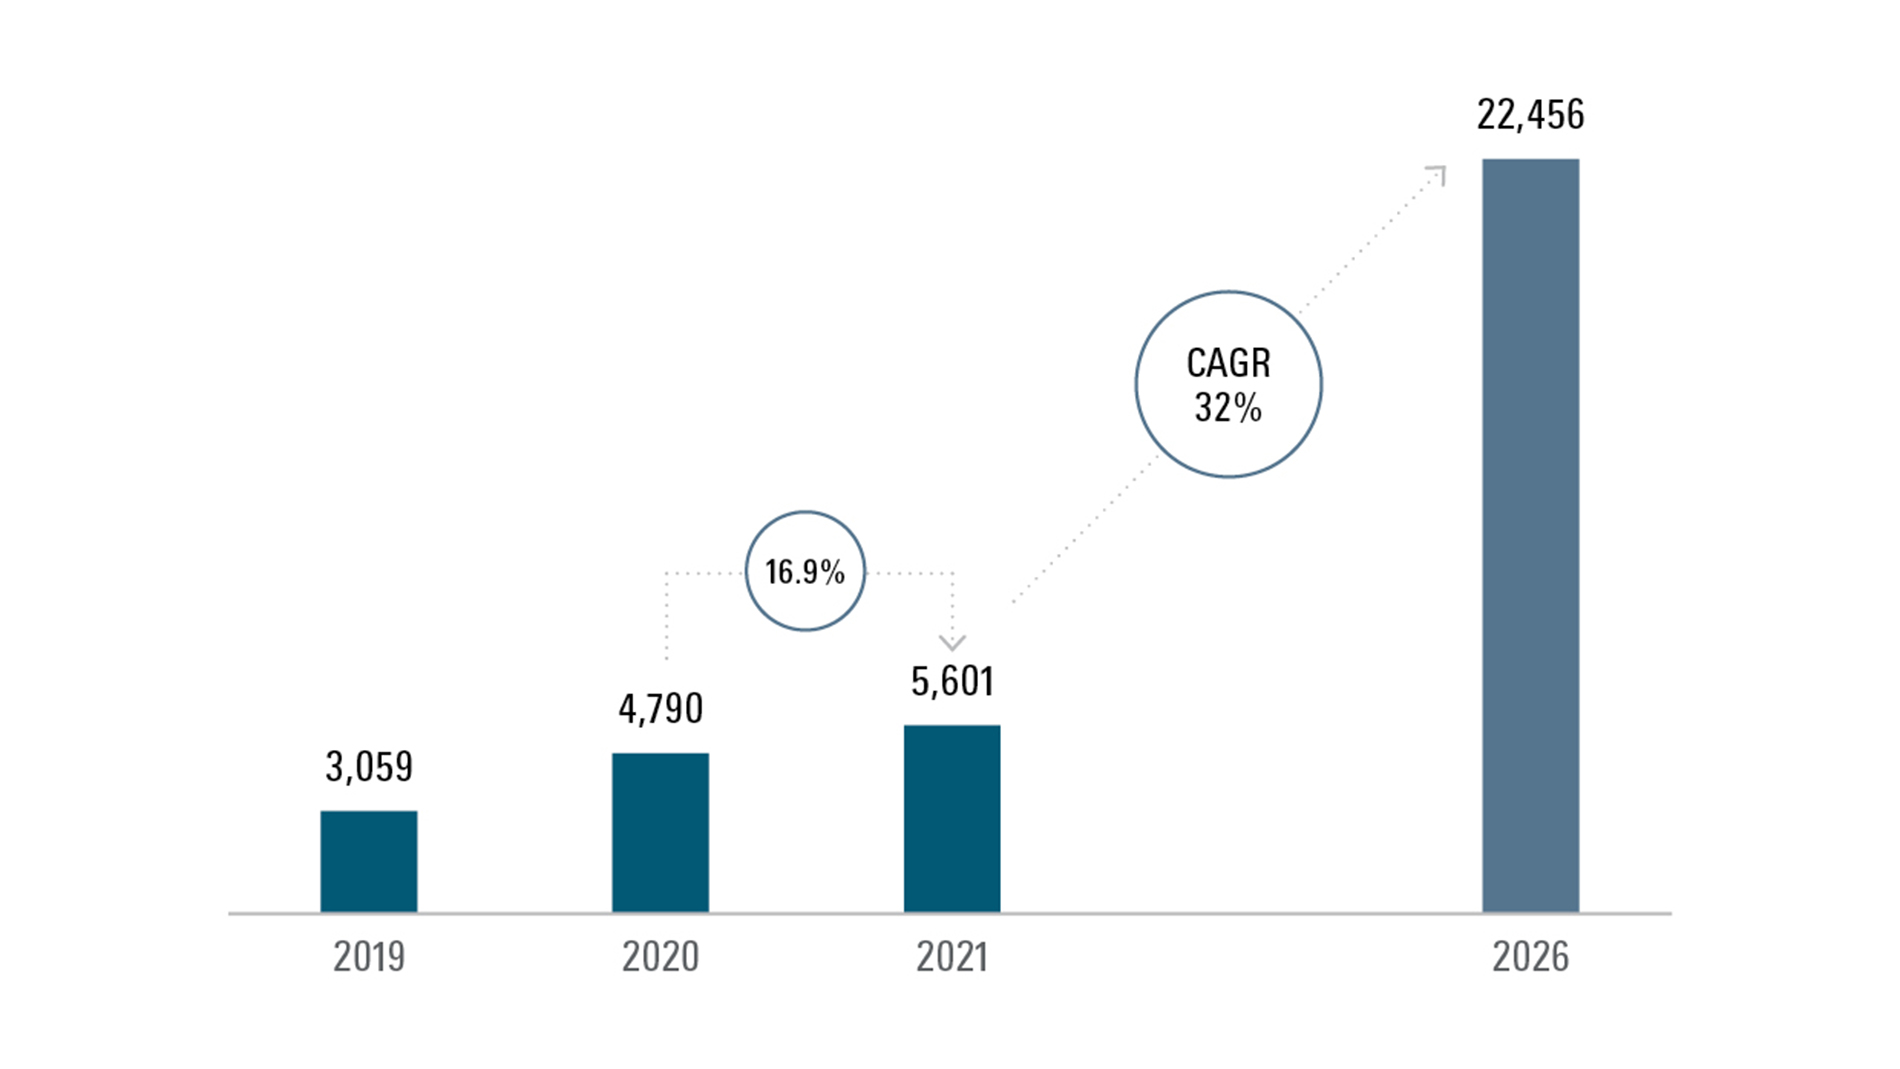 Development in annual metal powder consumption in the AM industry from 2019 to 2021 and forecast up to 2026, in tons. Source: Ampower